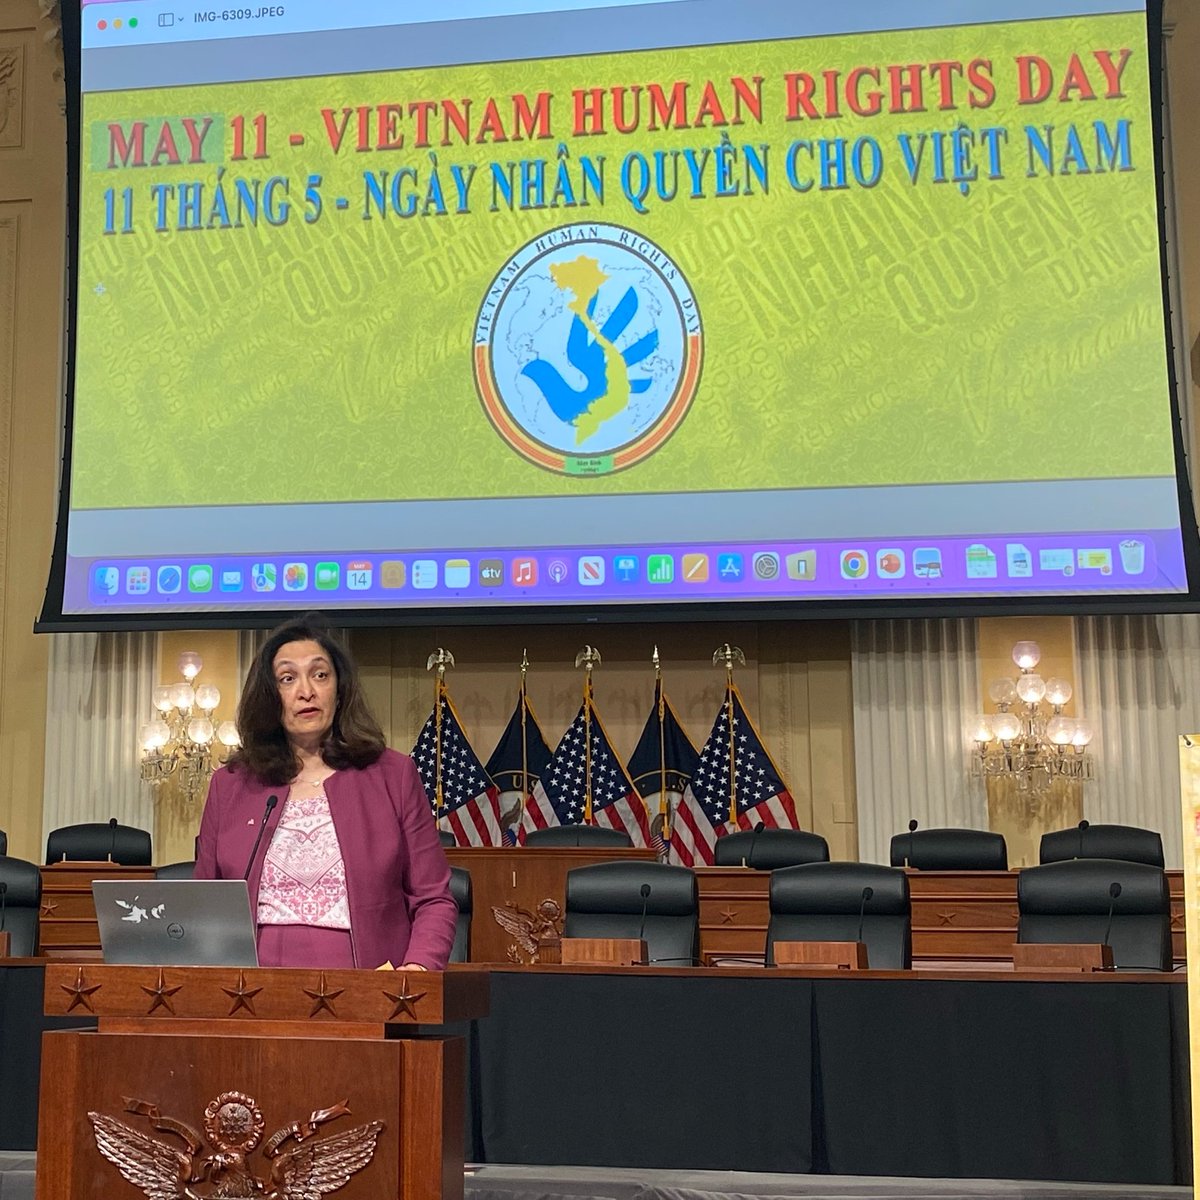 Honored to provide this year’s keynote for the 30th anniversary of Vietnam Human Rights Day. 🇺🇸 urges the Government of Vietnam to address our growing concerns over Vietnam’s restrictions on the exercise of human rights and fundamental freedoms.